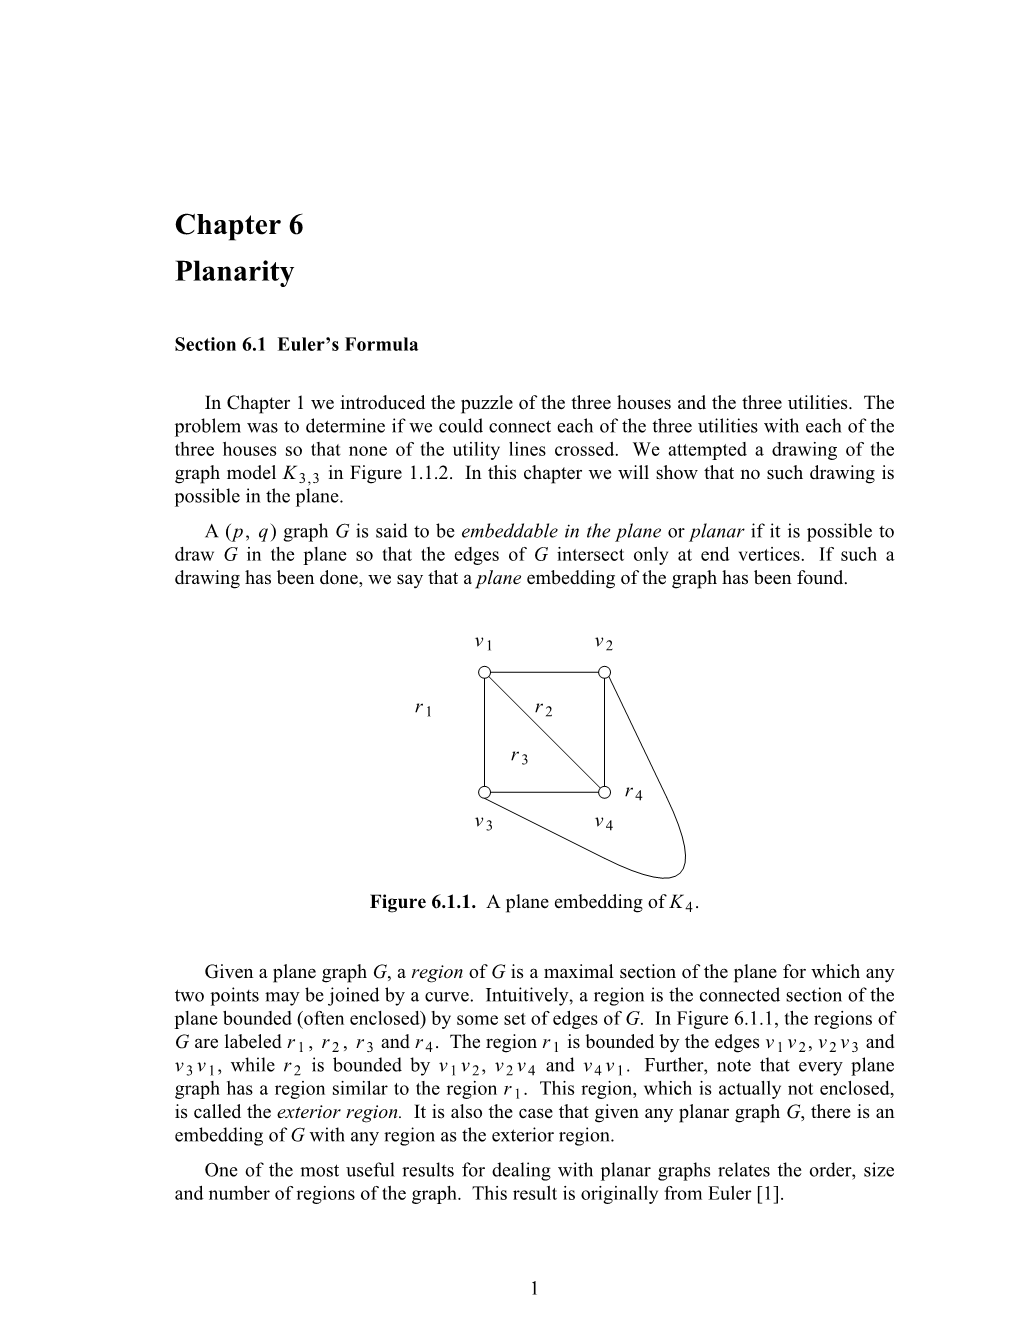 Chapter 6 Planarity